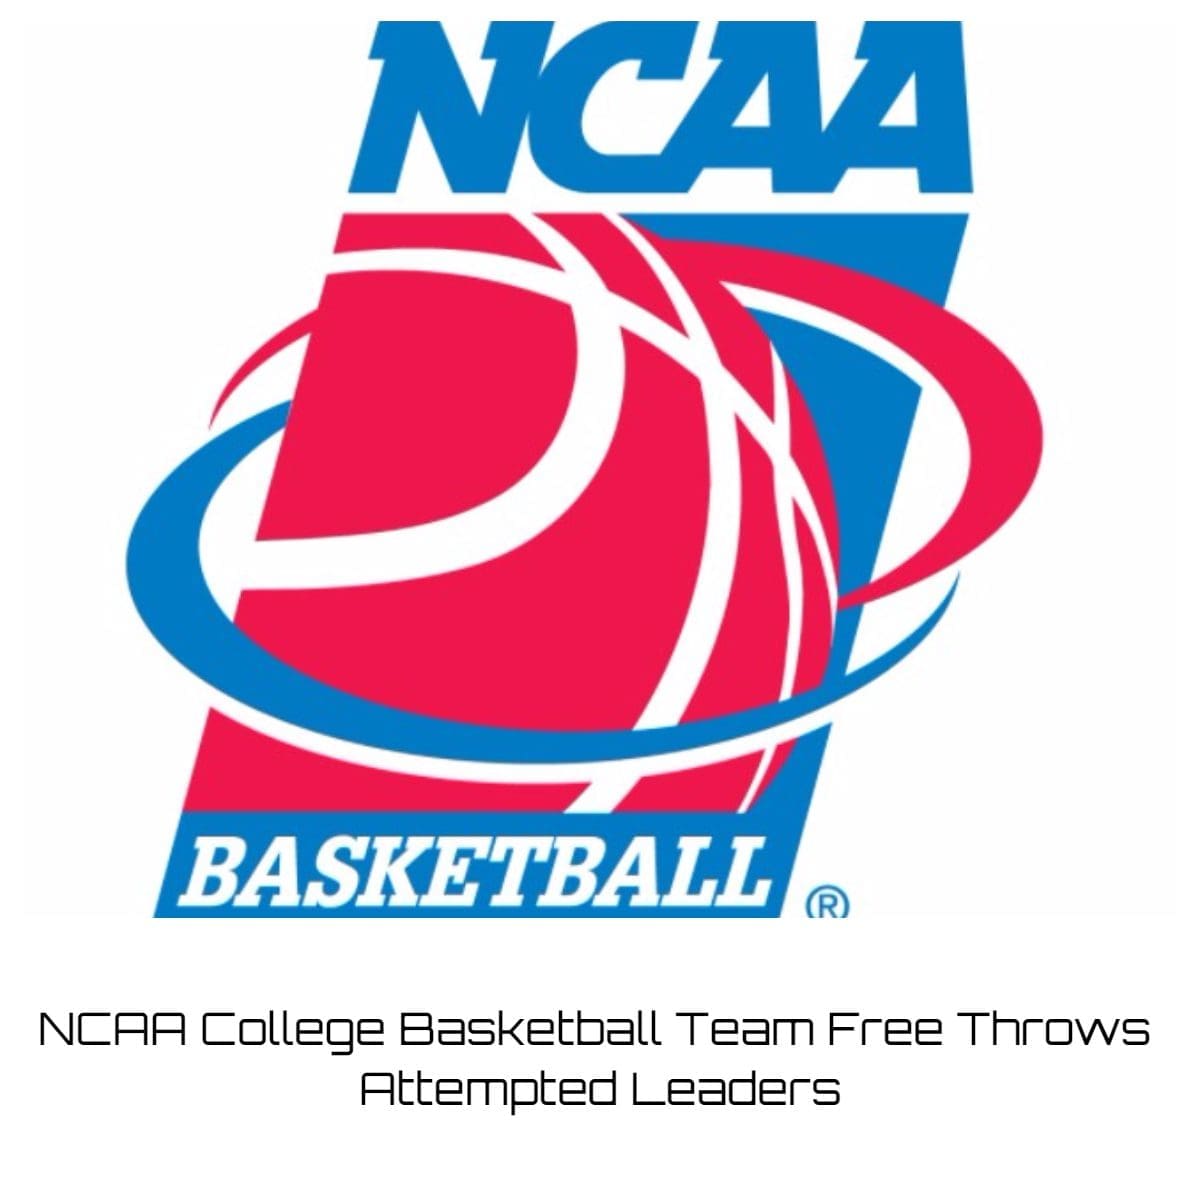 NCAA College Basketball Team Free Throws Attempted Leaders